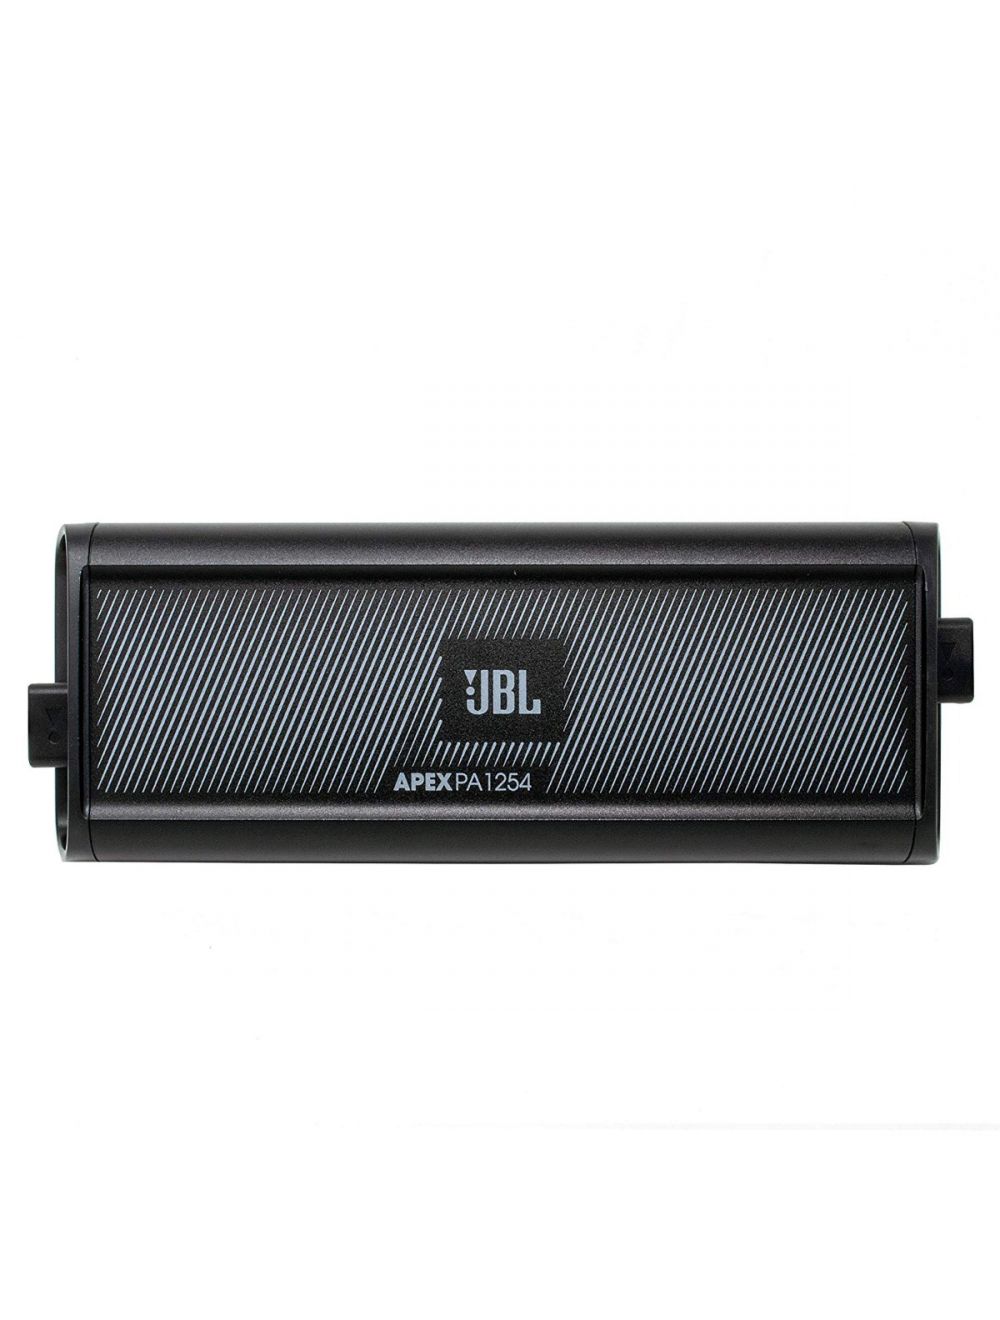 JBL Apex PA1254 Compact 4-channel Powersports Amplifier  75 watts RMS x 4